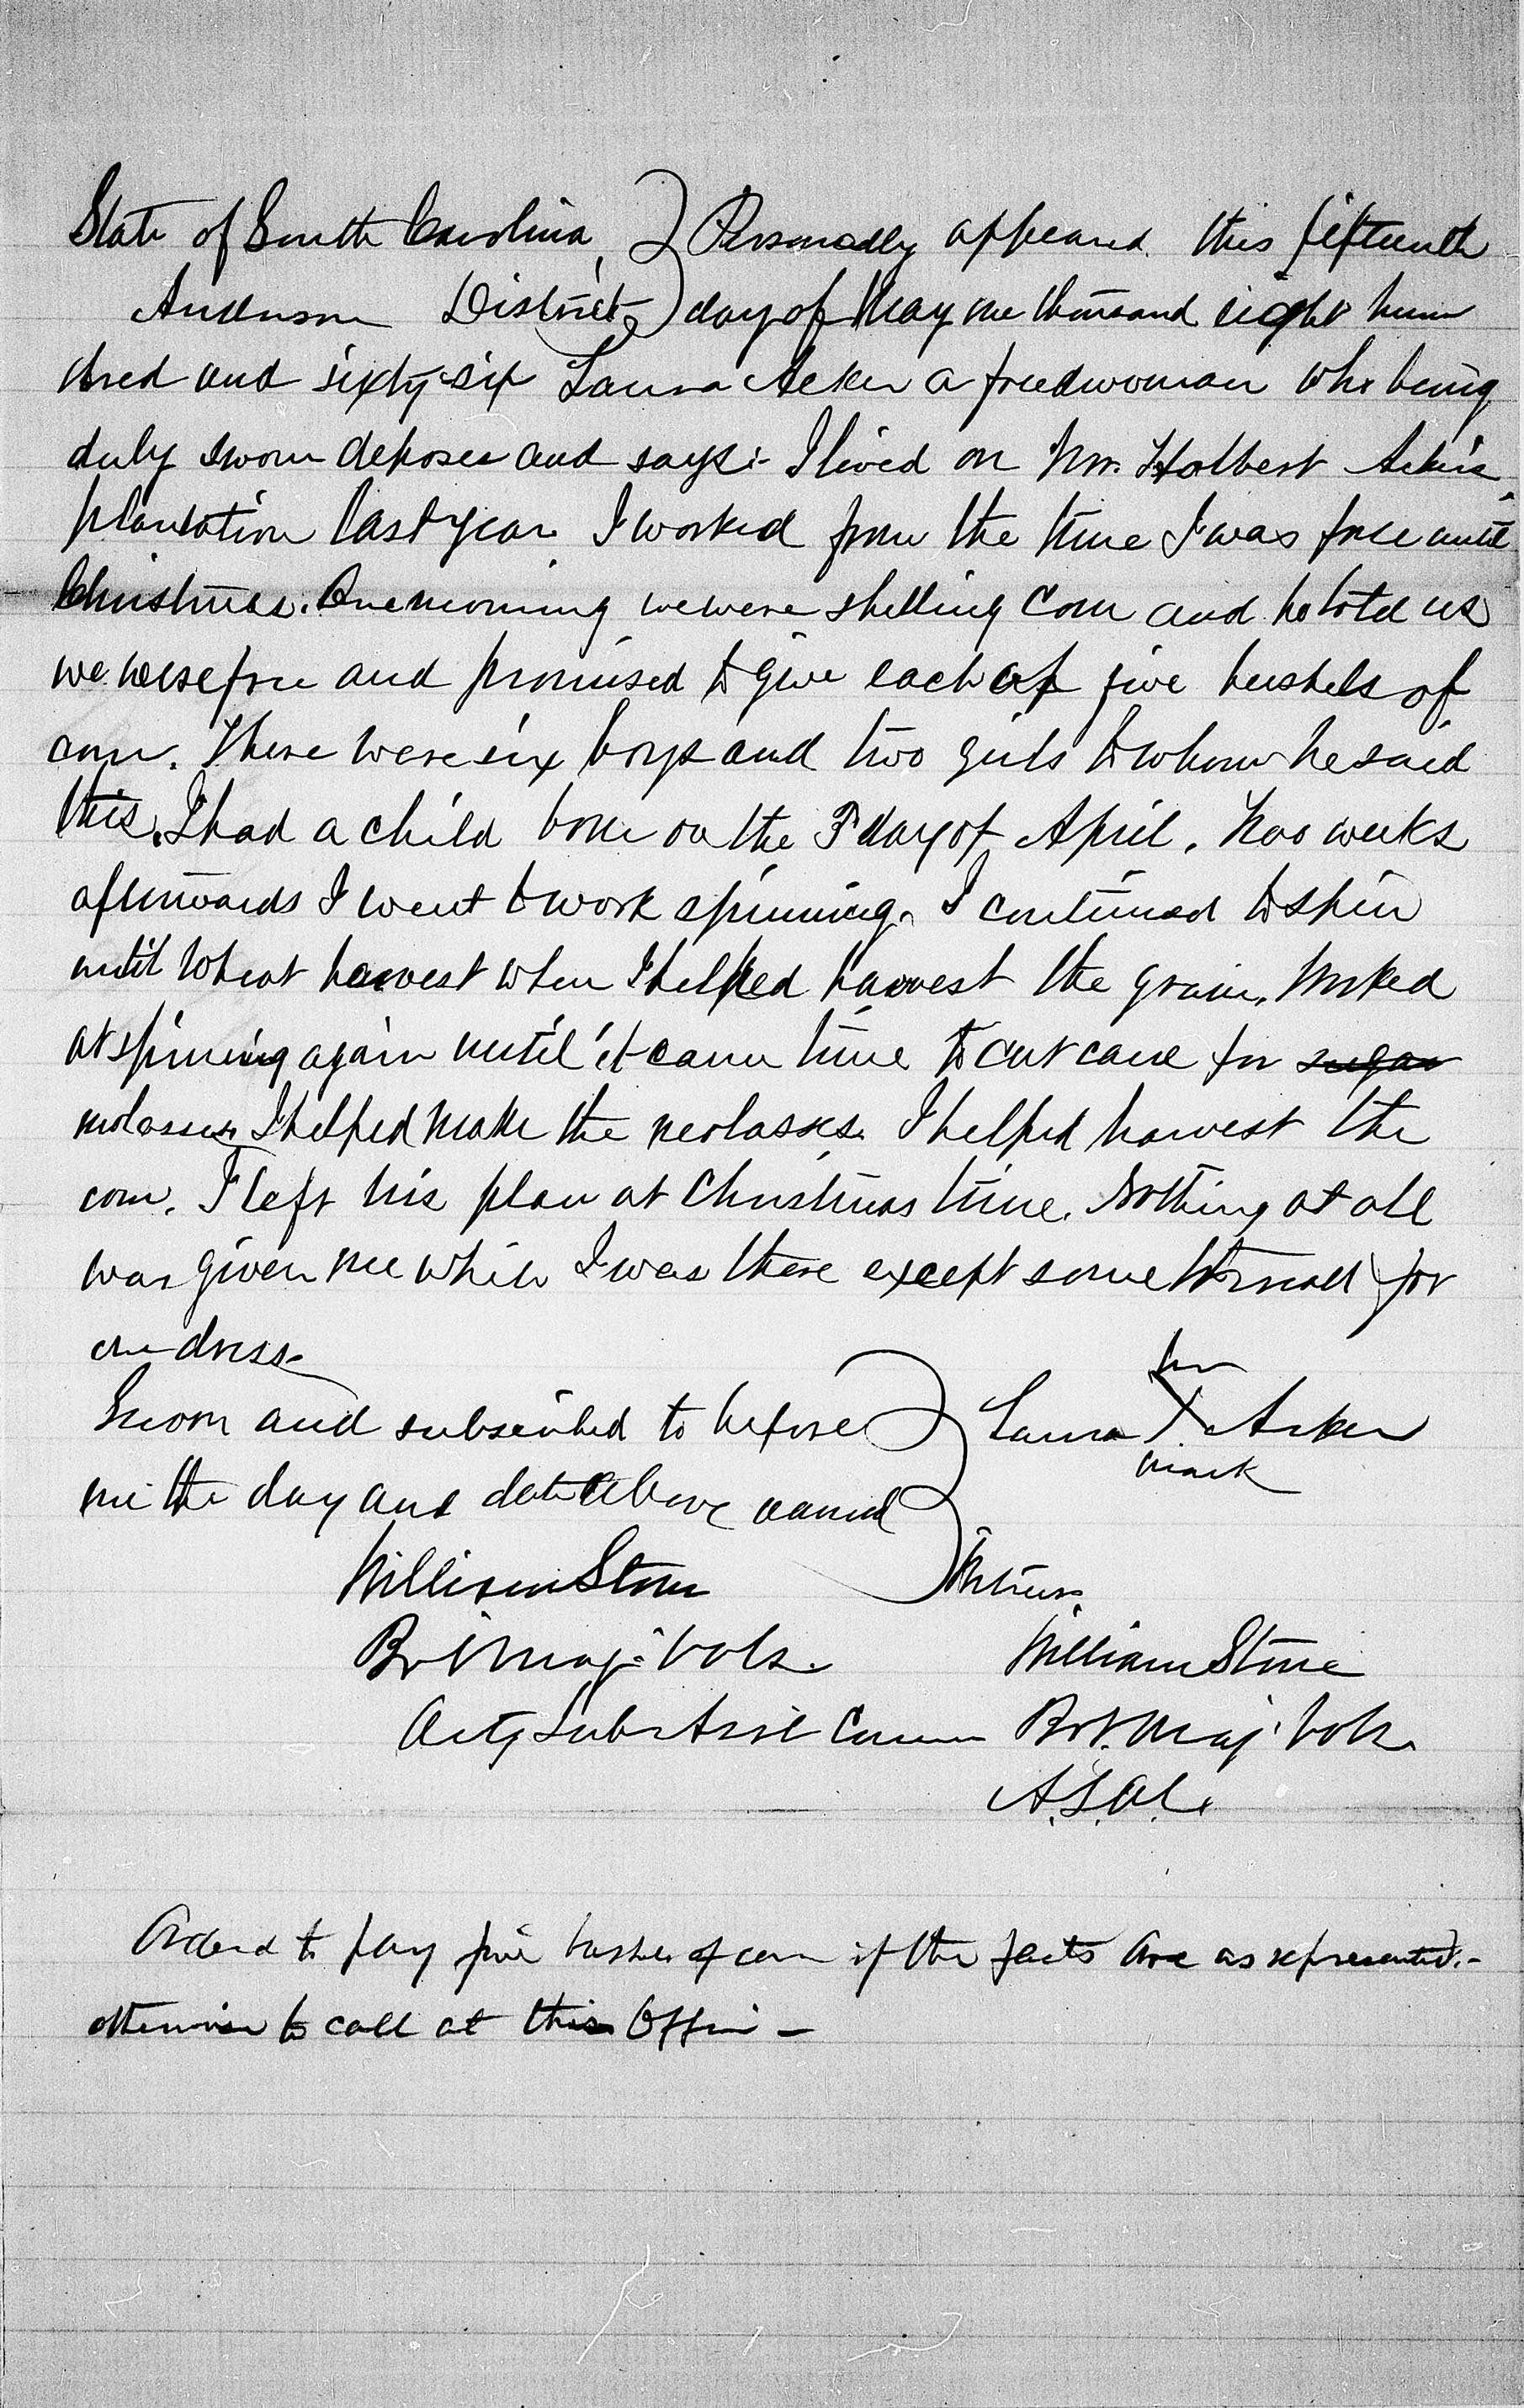 A handwritten affidavit of Laura Acker on lined paper. the affidavit is about 3/4ths of the page long.